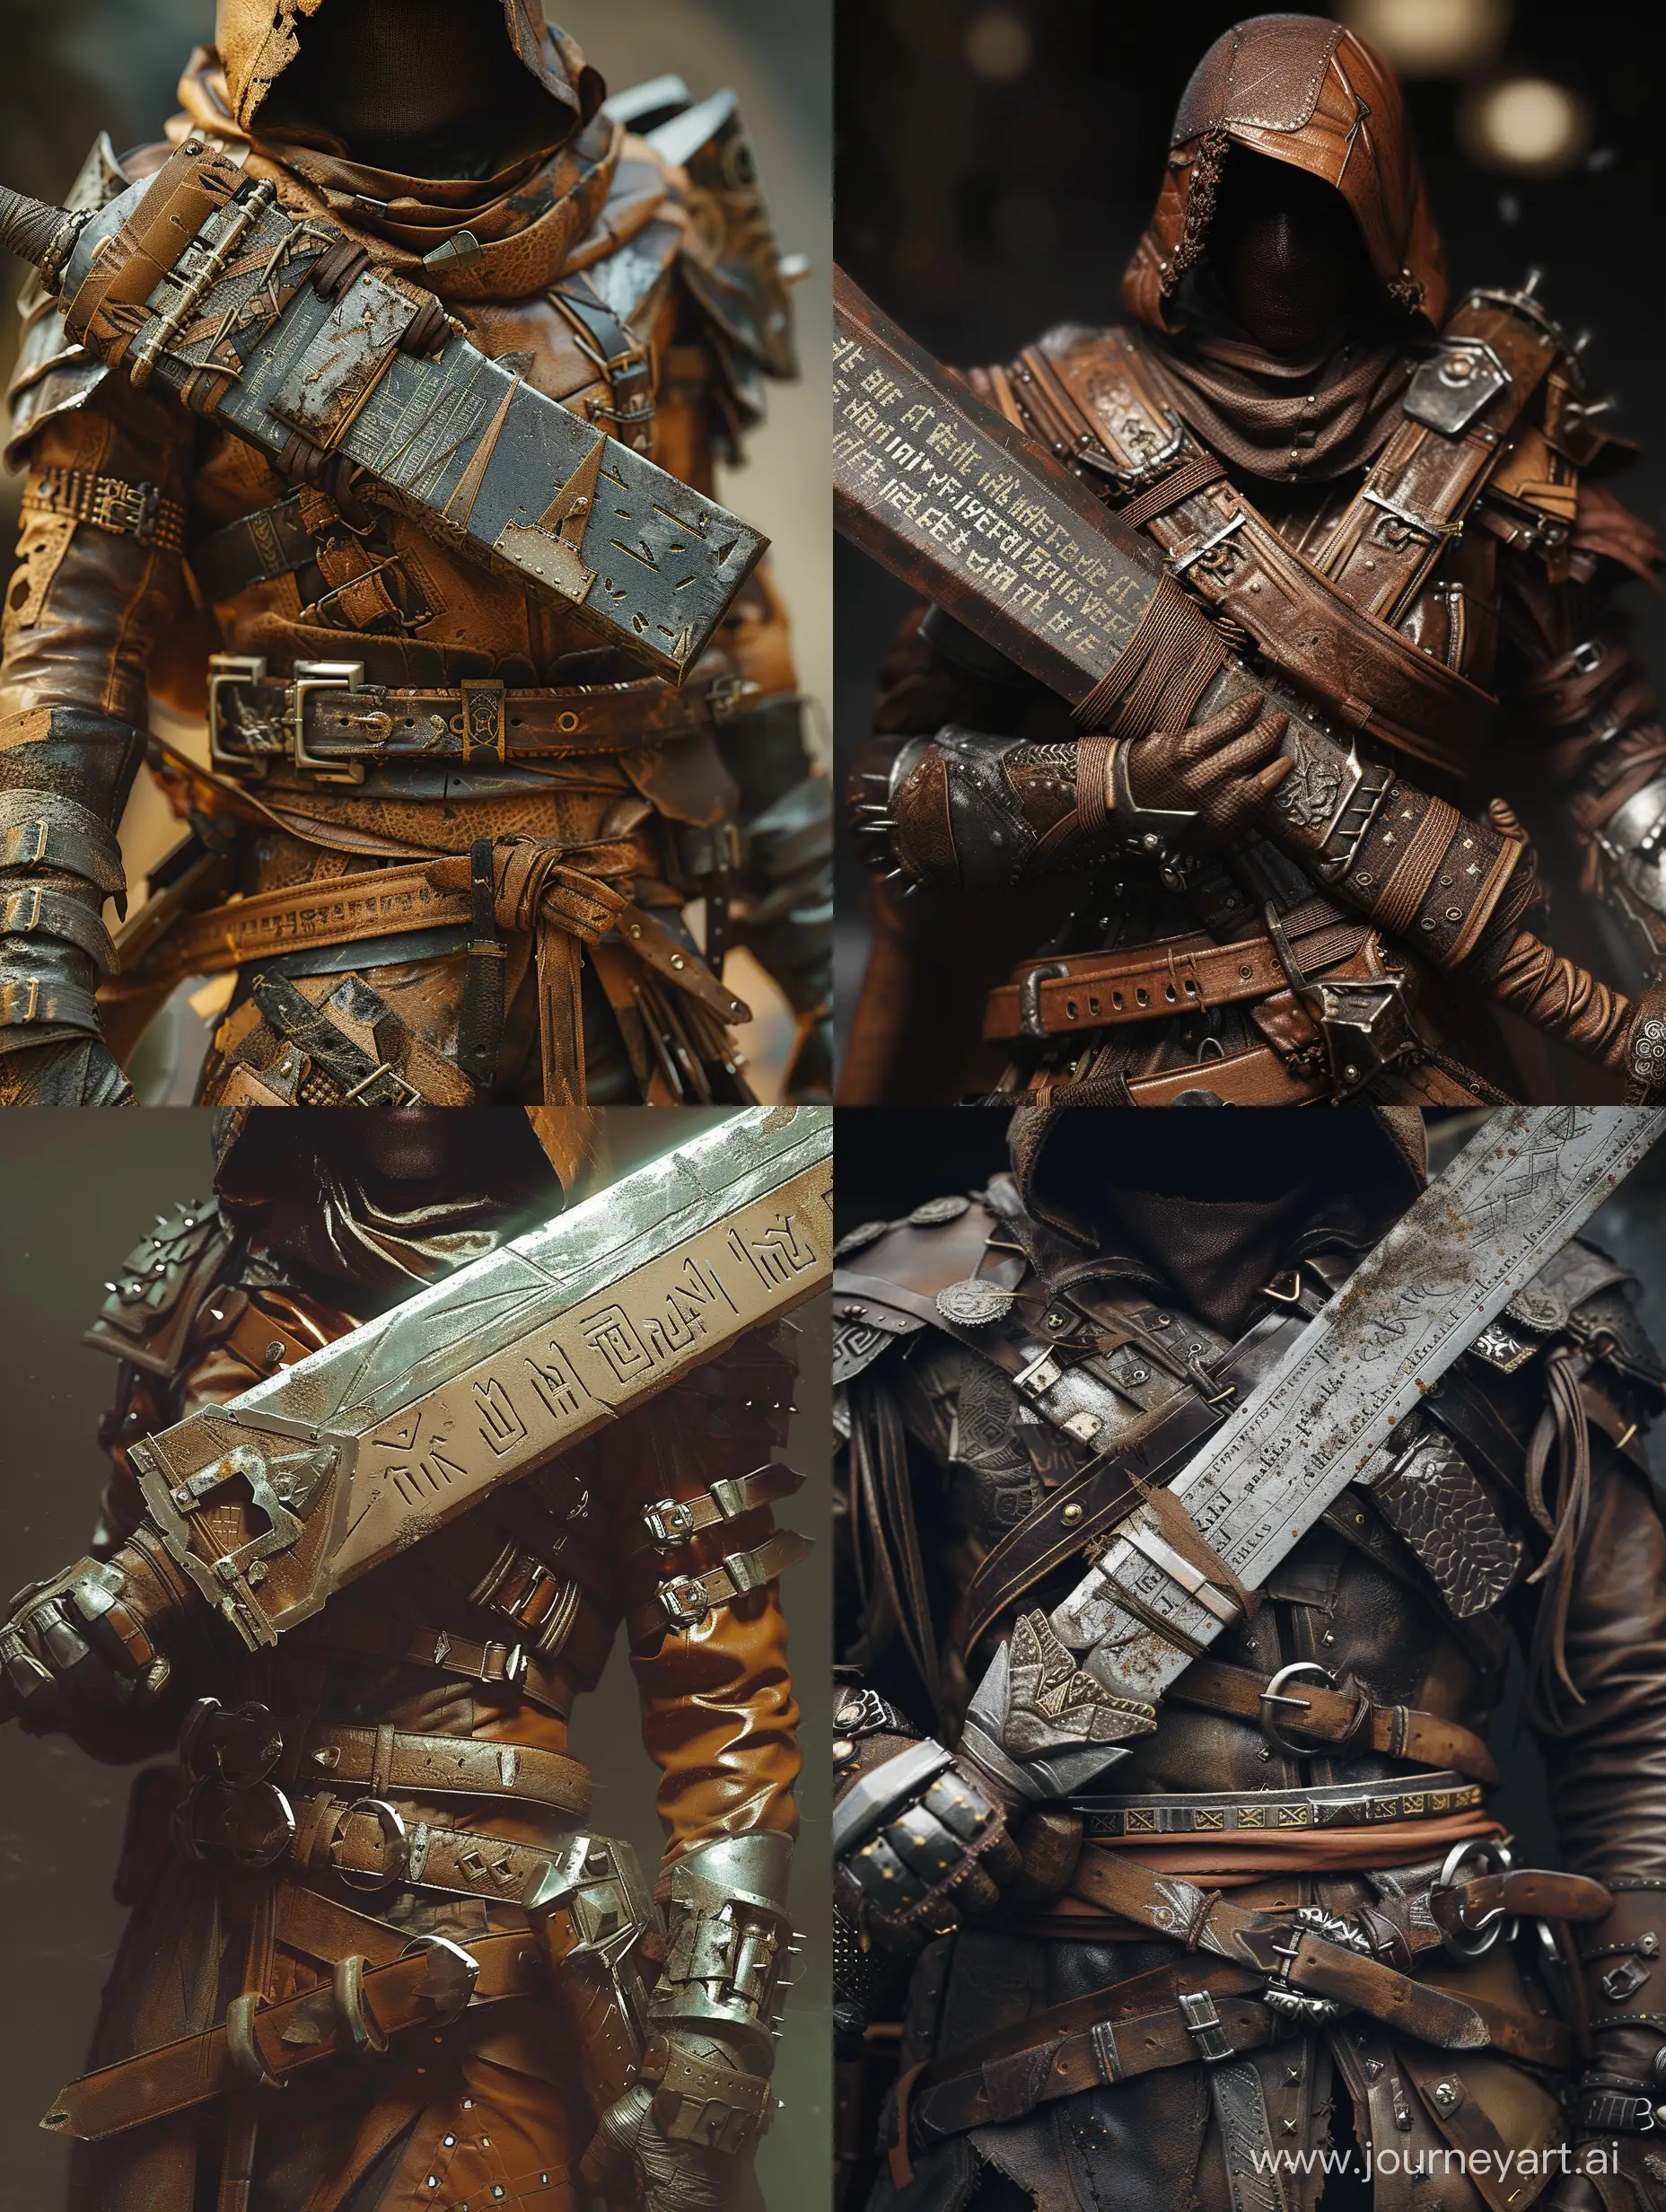 The image depicts a mysterious and formidable figure, clad in intricate leather armor. Their face remains concealed, adding an air of enigma. Here are the key elements:
Attire:
The person wears a leather jacket adorned with metallic accents. Belts wrap around the jacket, suggesting a rugged and battle-ready appearance.
The attire is multi-layered, hinting at complexity and functionality.
Weapon:
The individual brandishes a large sword with inscriptions on its blade. The design implies significance, perhaps even magical properties.
Gloves:
Sturdy gloves with metallic protection cover their hands, suitable for combat scenarios.
The blurred text on the sword remains indecipherable, leaving us to wonder about the character’s backstory and purpose.